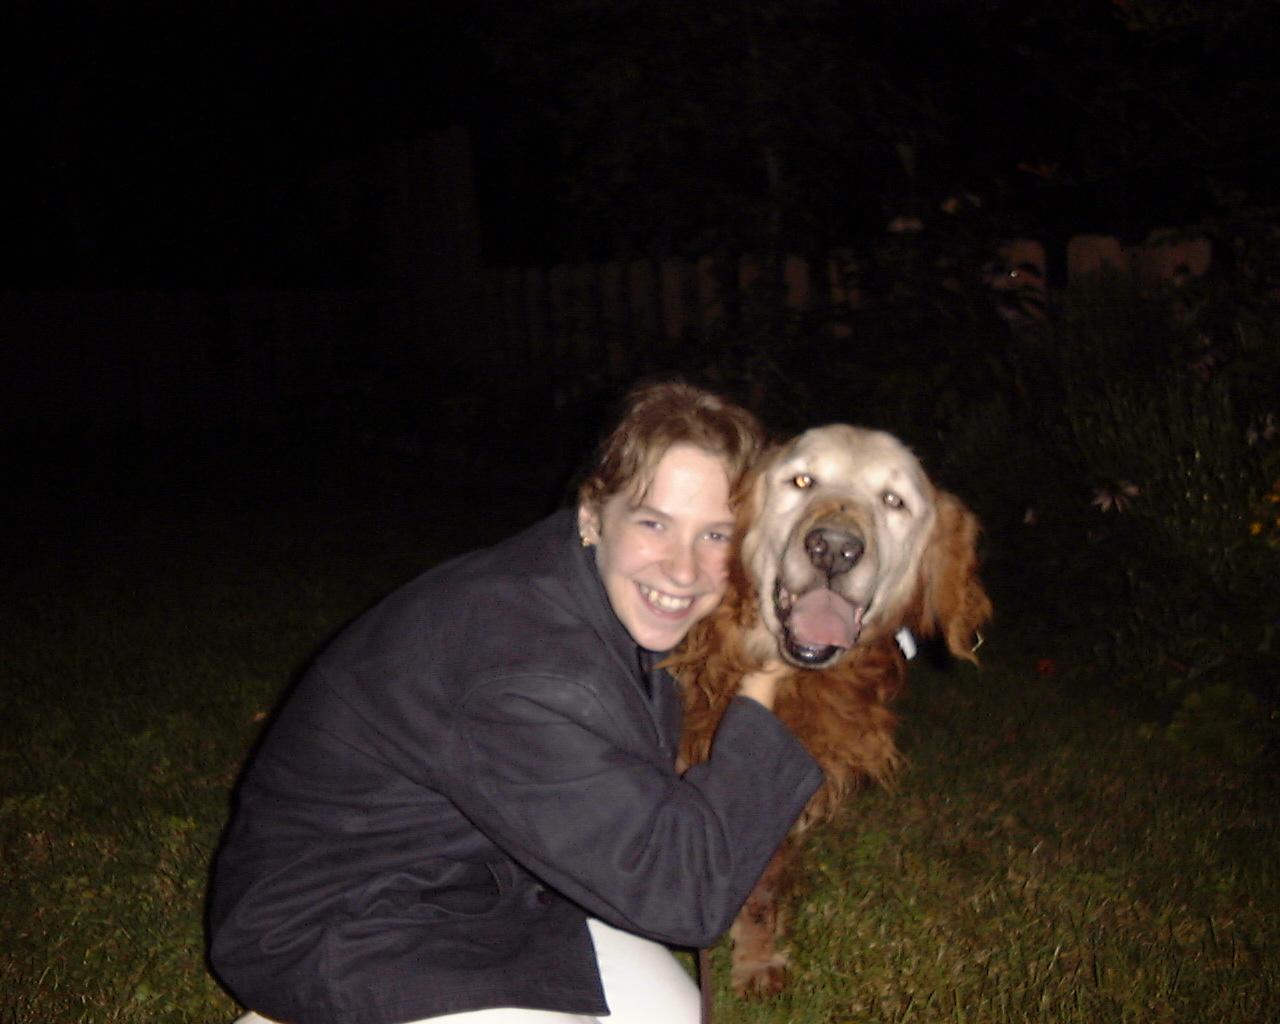 Cathy and Sampson
Cathy and our wonderful old Golden Retriever Sampson, who sadly left us in 2001.
